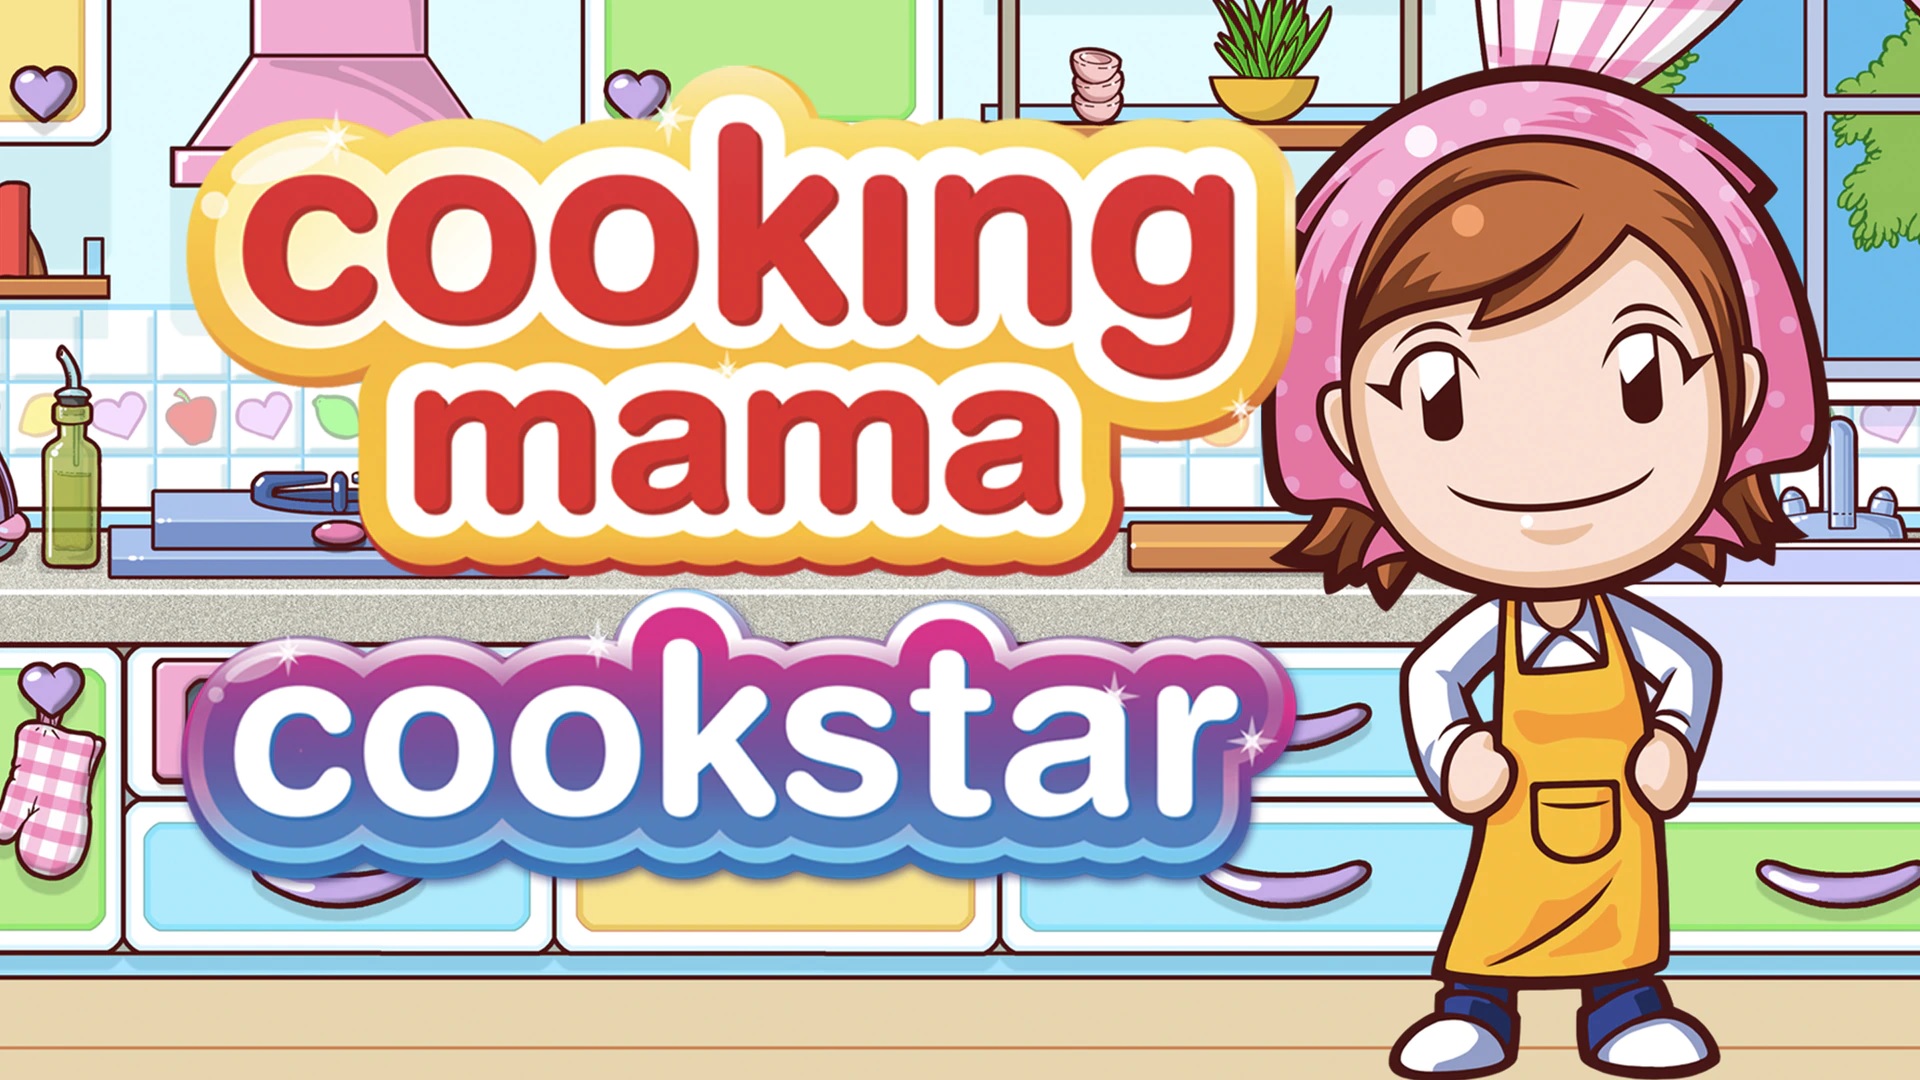 Cooking Mama: Cookstar Now Available for PS4